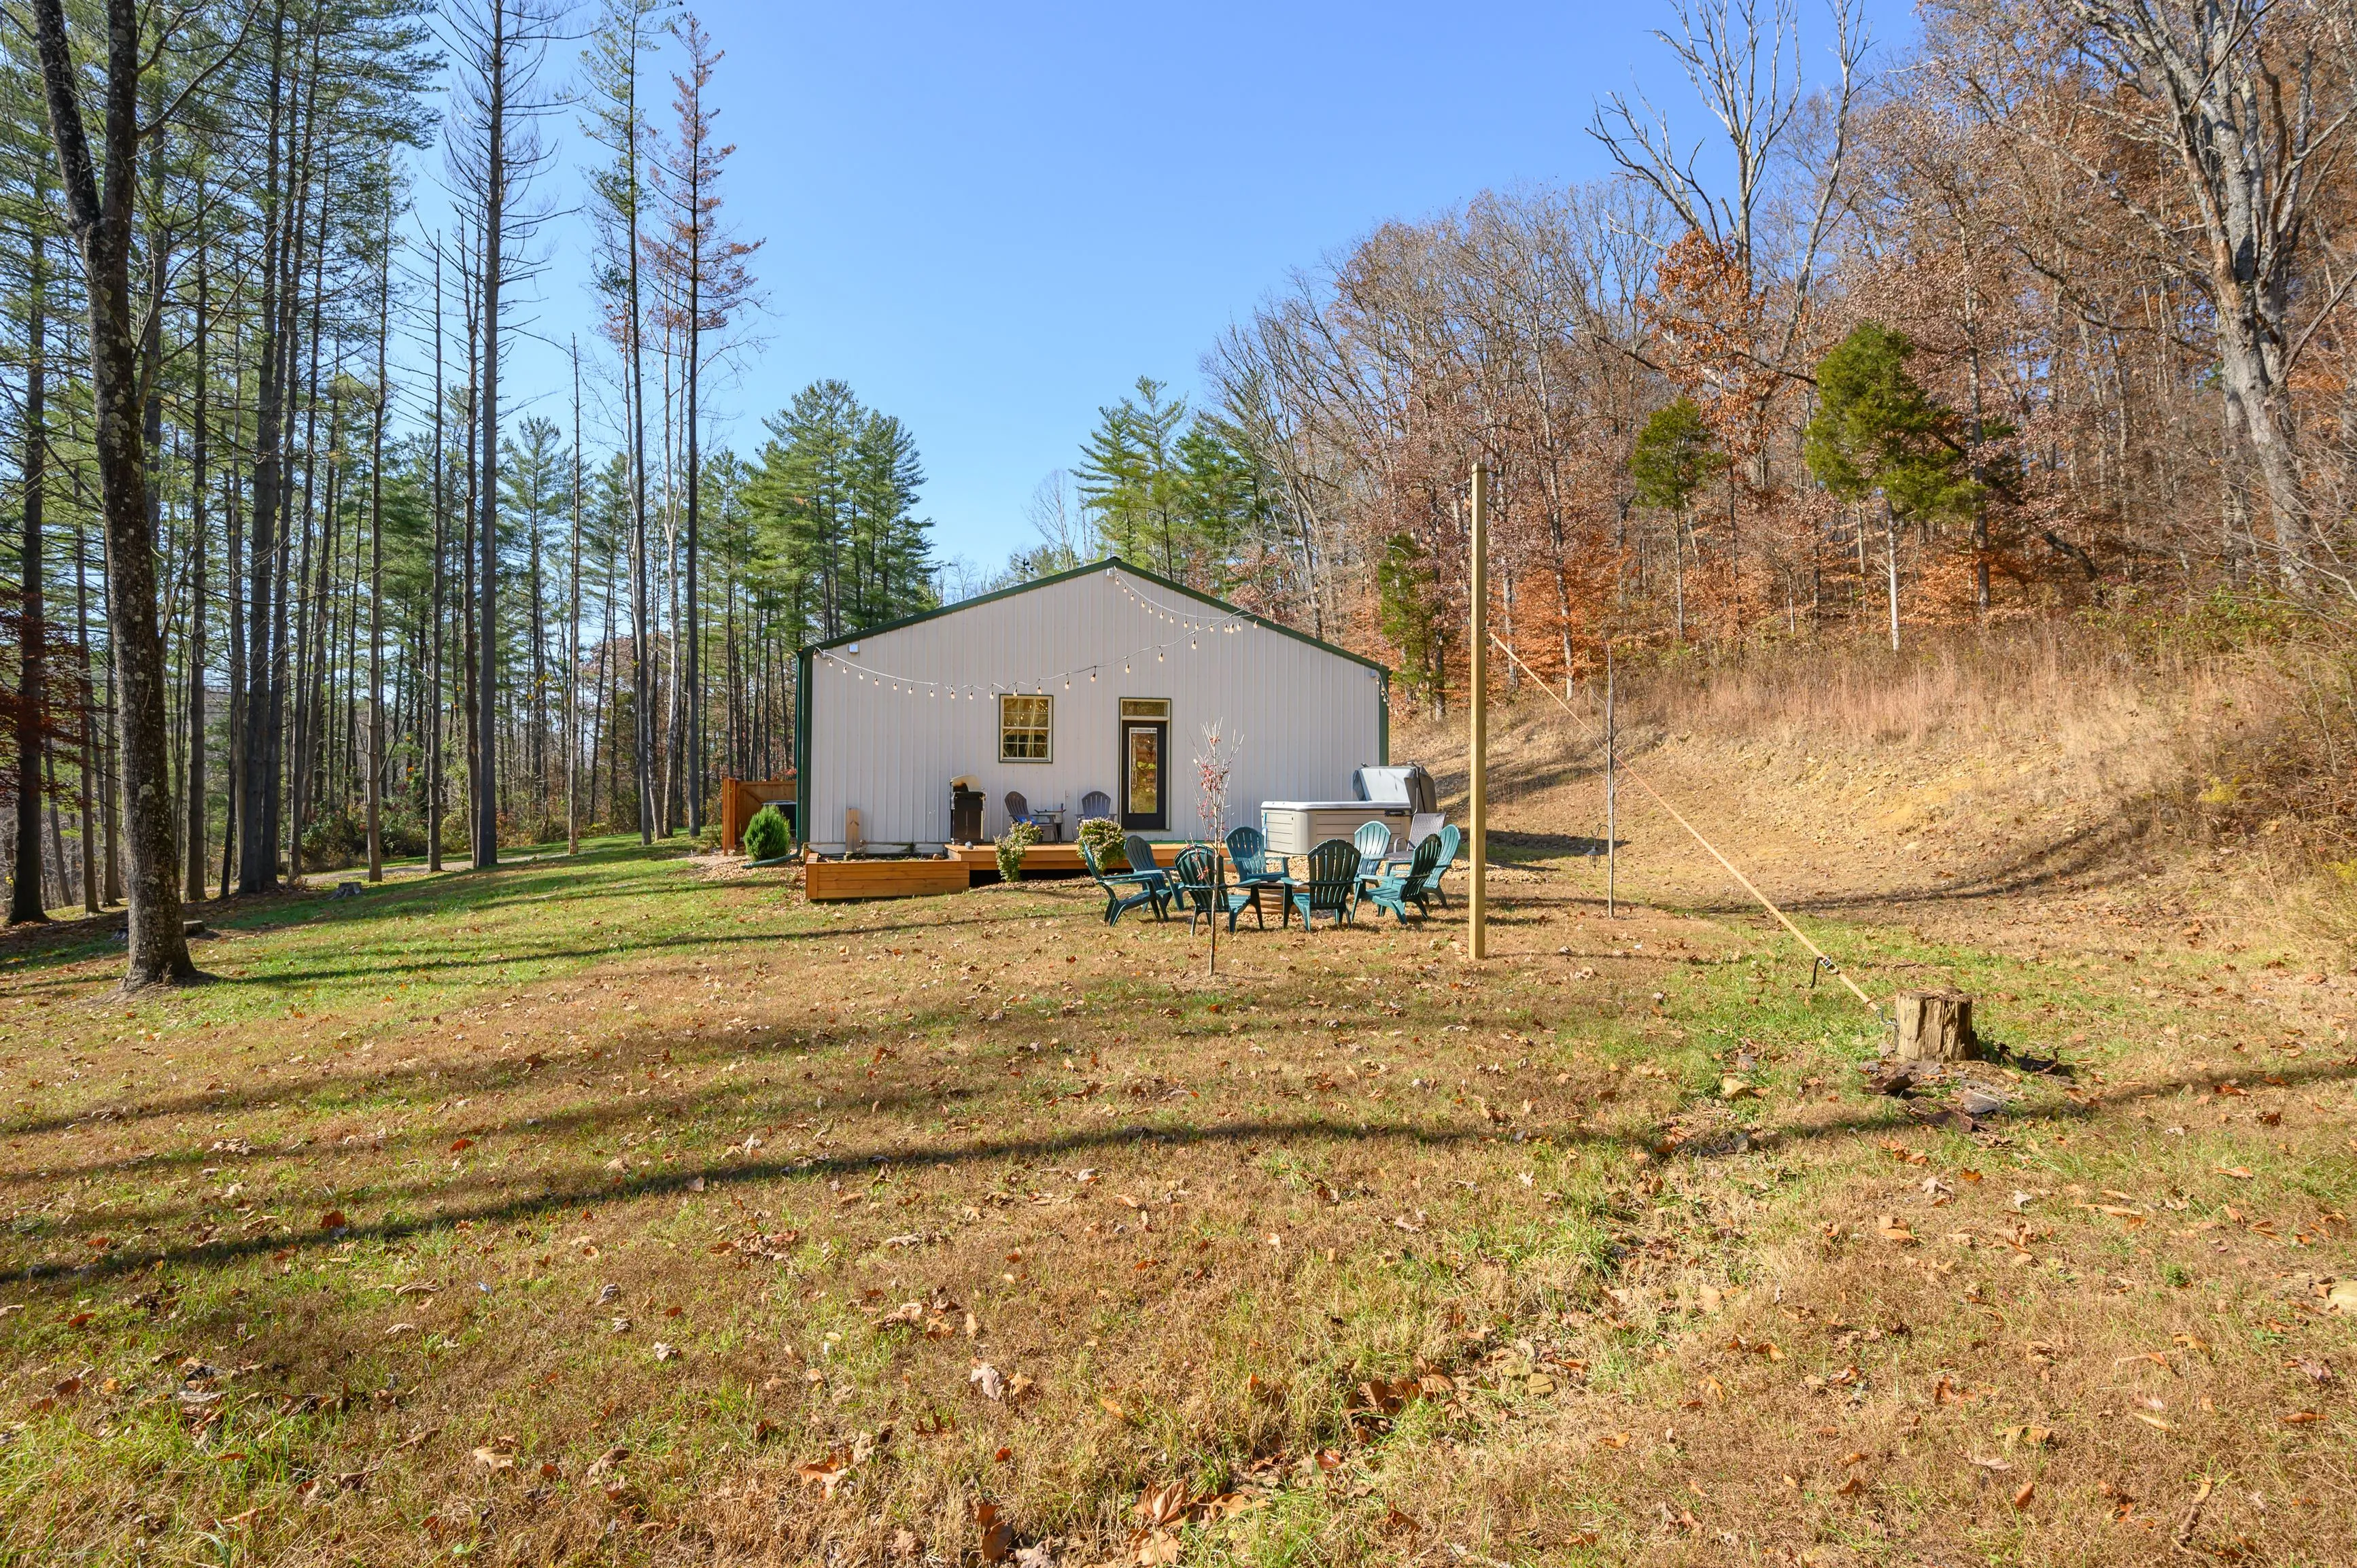 A small metal building with patio furniture outside located in a grassy clearing surrounded by forest with trees showing autumn foliage.